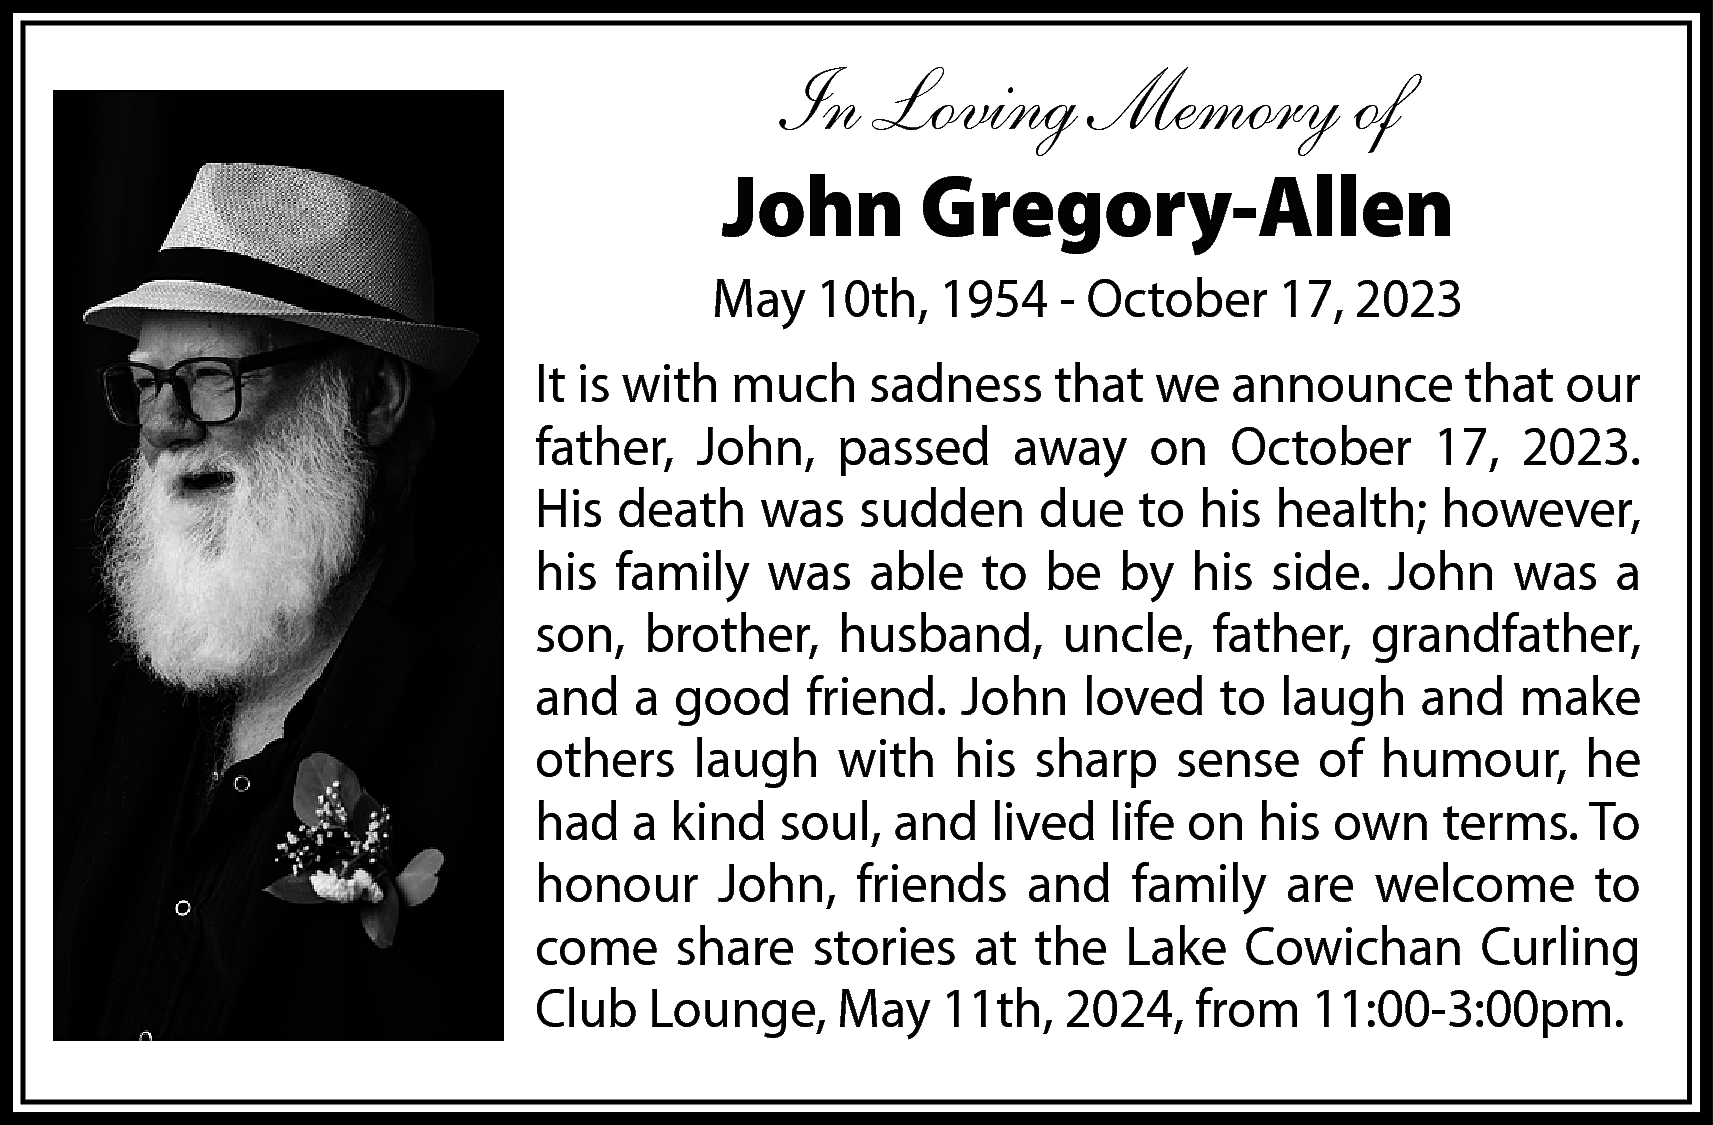 In Loving Memory of <br>John  In Loving Memory of  John Gregory-Allen  May 10th, 1954 - October 17, 2023  It is with much sadness that we announce that our  father, John, passed away on October 17, 2023.  His death was sudden due to his health; however,  his family was able to be by his side. John was a  son, brother, husband, uncle, father, grandfather,  and a good friend. John loved to laugh and make  others laugh with his sharp sense of humour, he  had a kind soul, and lived life on his own terms. To  honour John, friends and family are welcome to  come share stories at the Lake Cowichan Curling  Club Lounge, May 11th, 2024, from 11:00-3:00pm.    